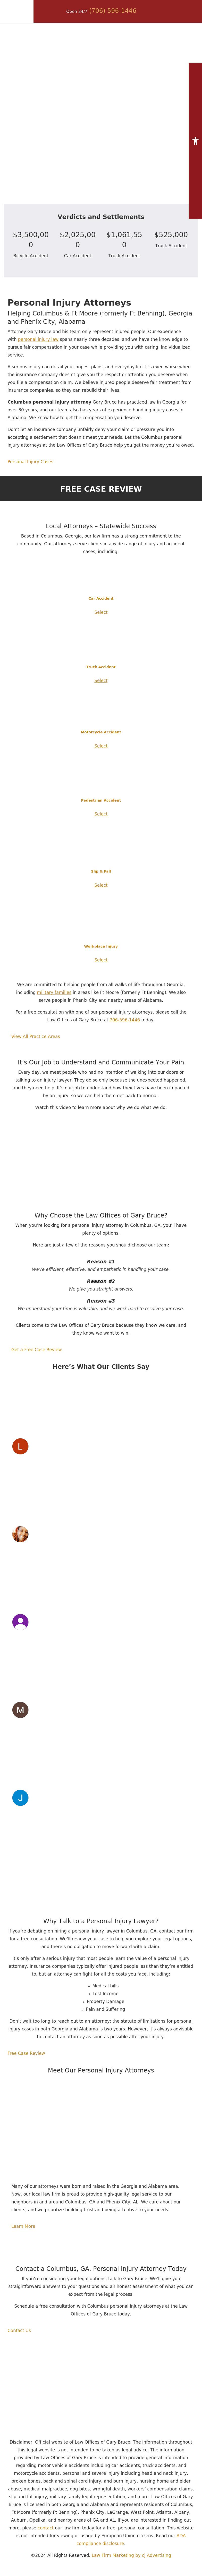 Law Offices of Gary Bruce, P.C. - Columbus GA Lawyers